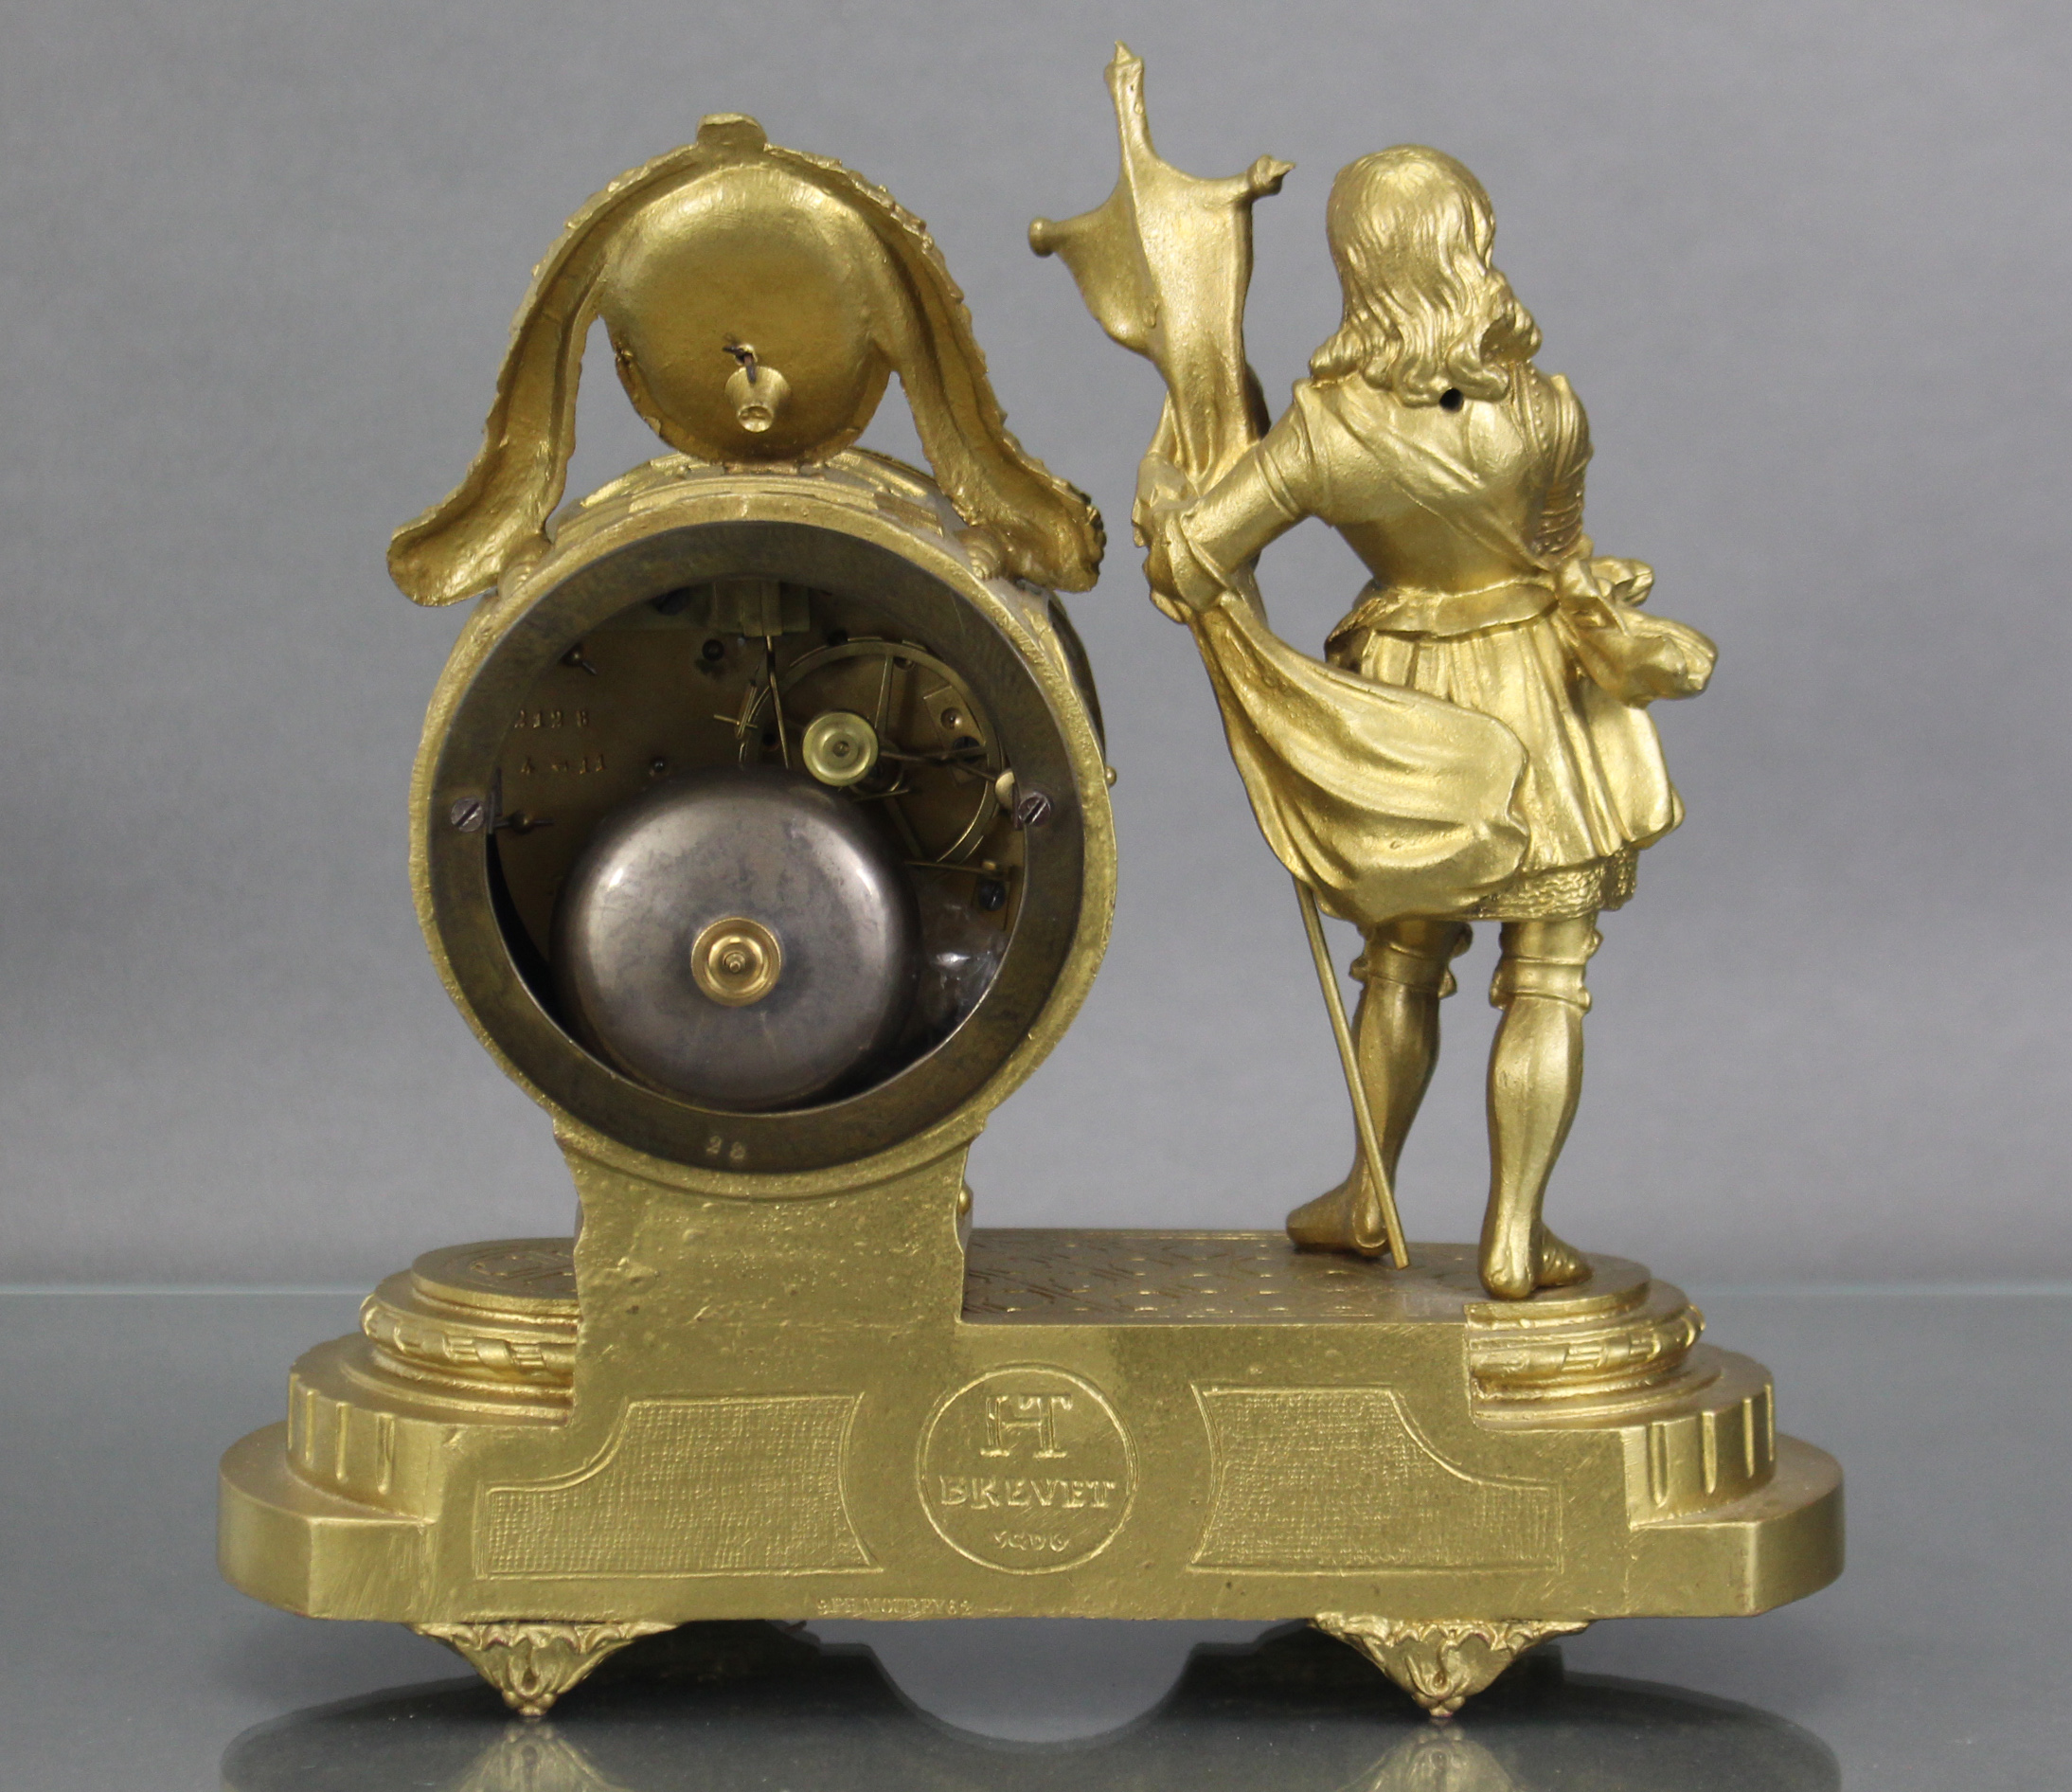 A 19th century French figural mantel clock by Brevet, the 3” green enamel dial with floral - Image 3 of 3